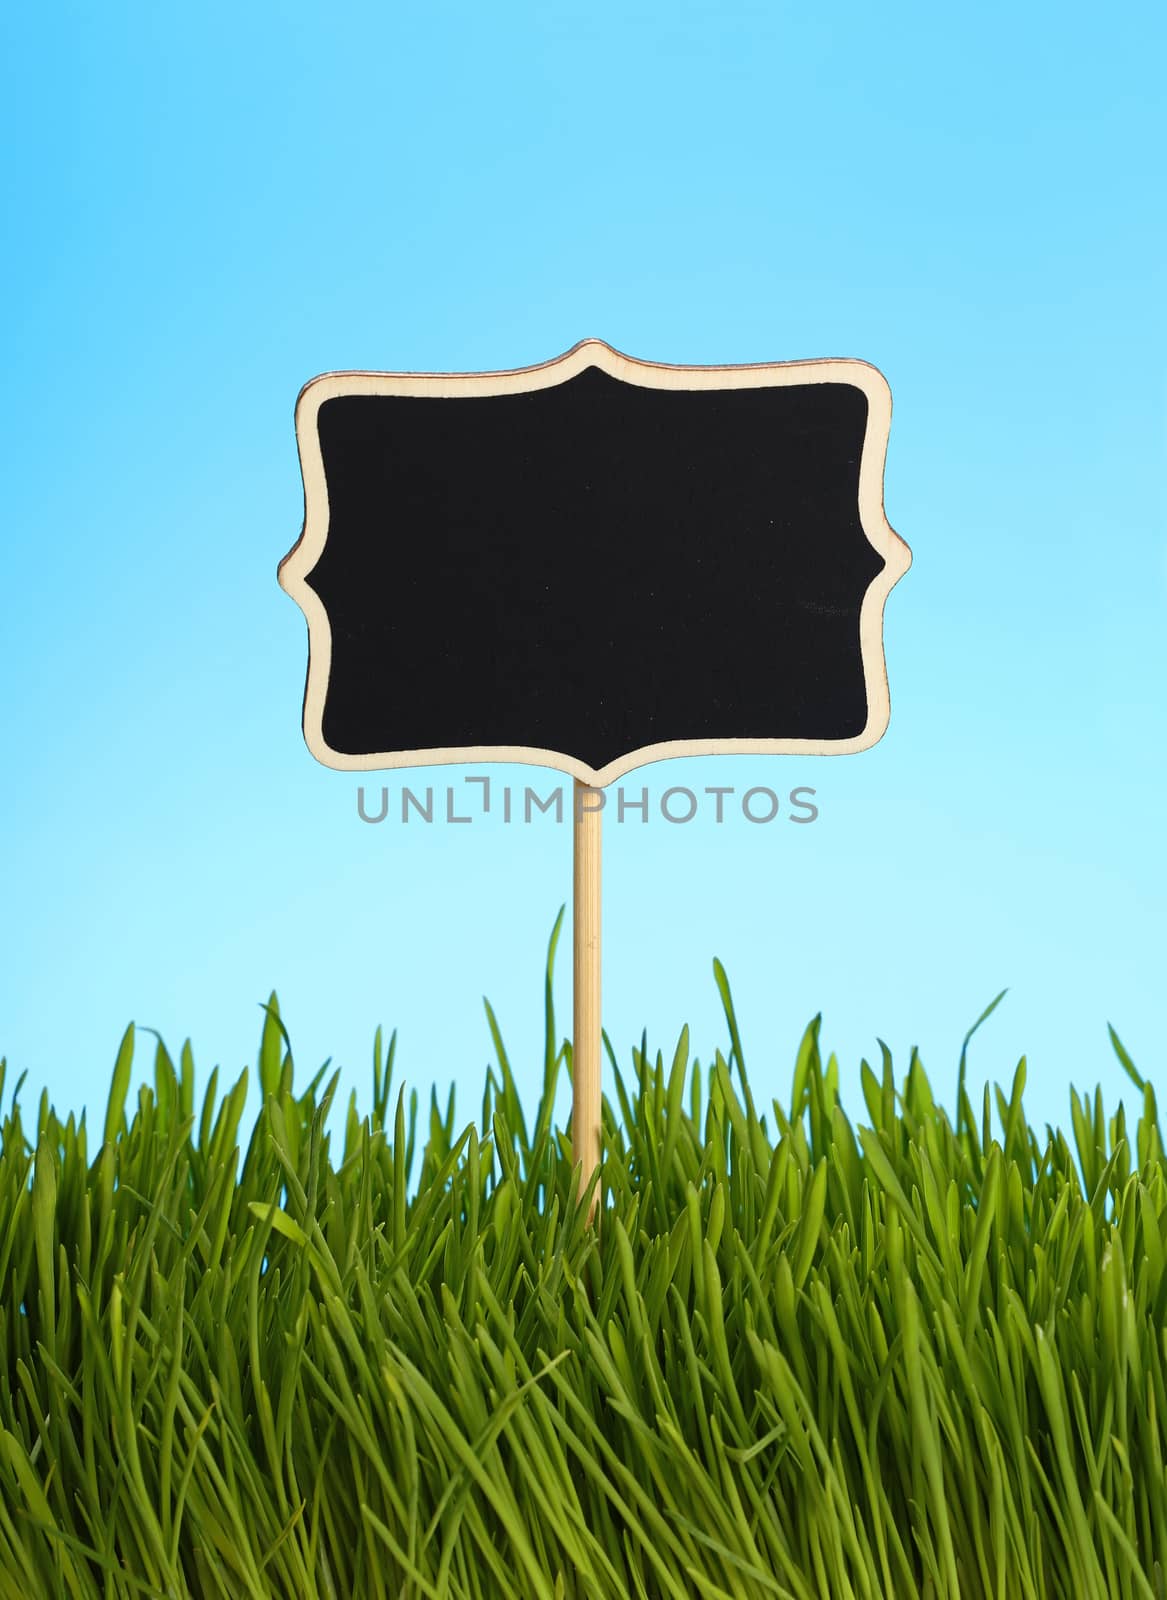 Black chalkboard sign in spring fresh green grass close up over background of clear blue sky